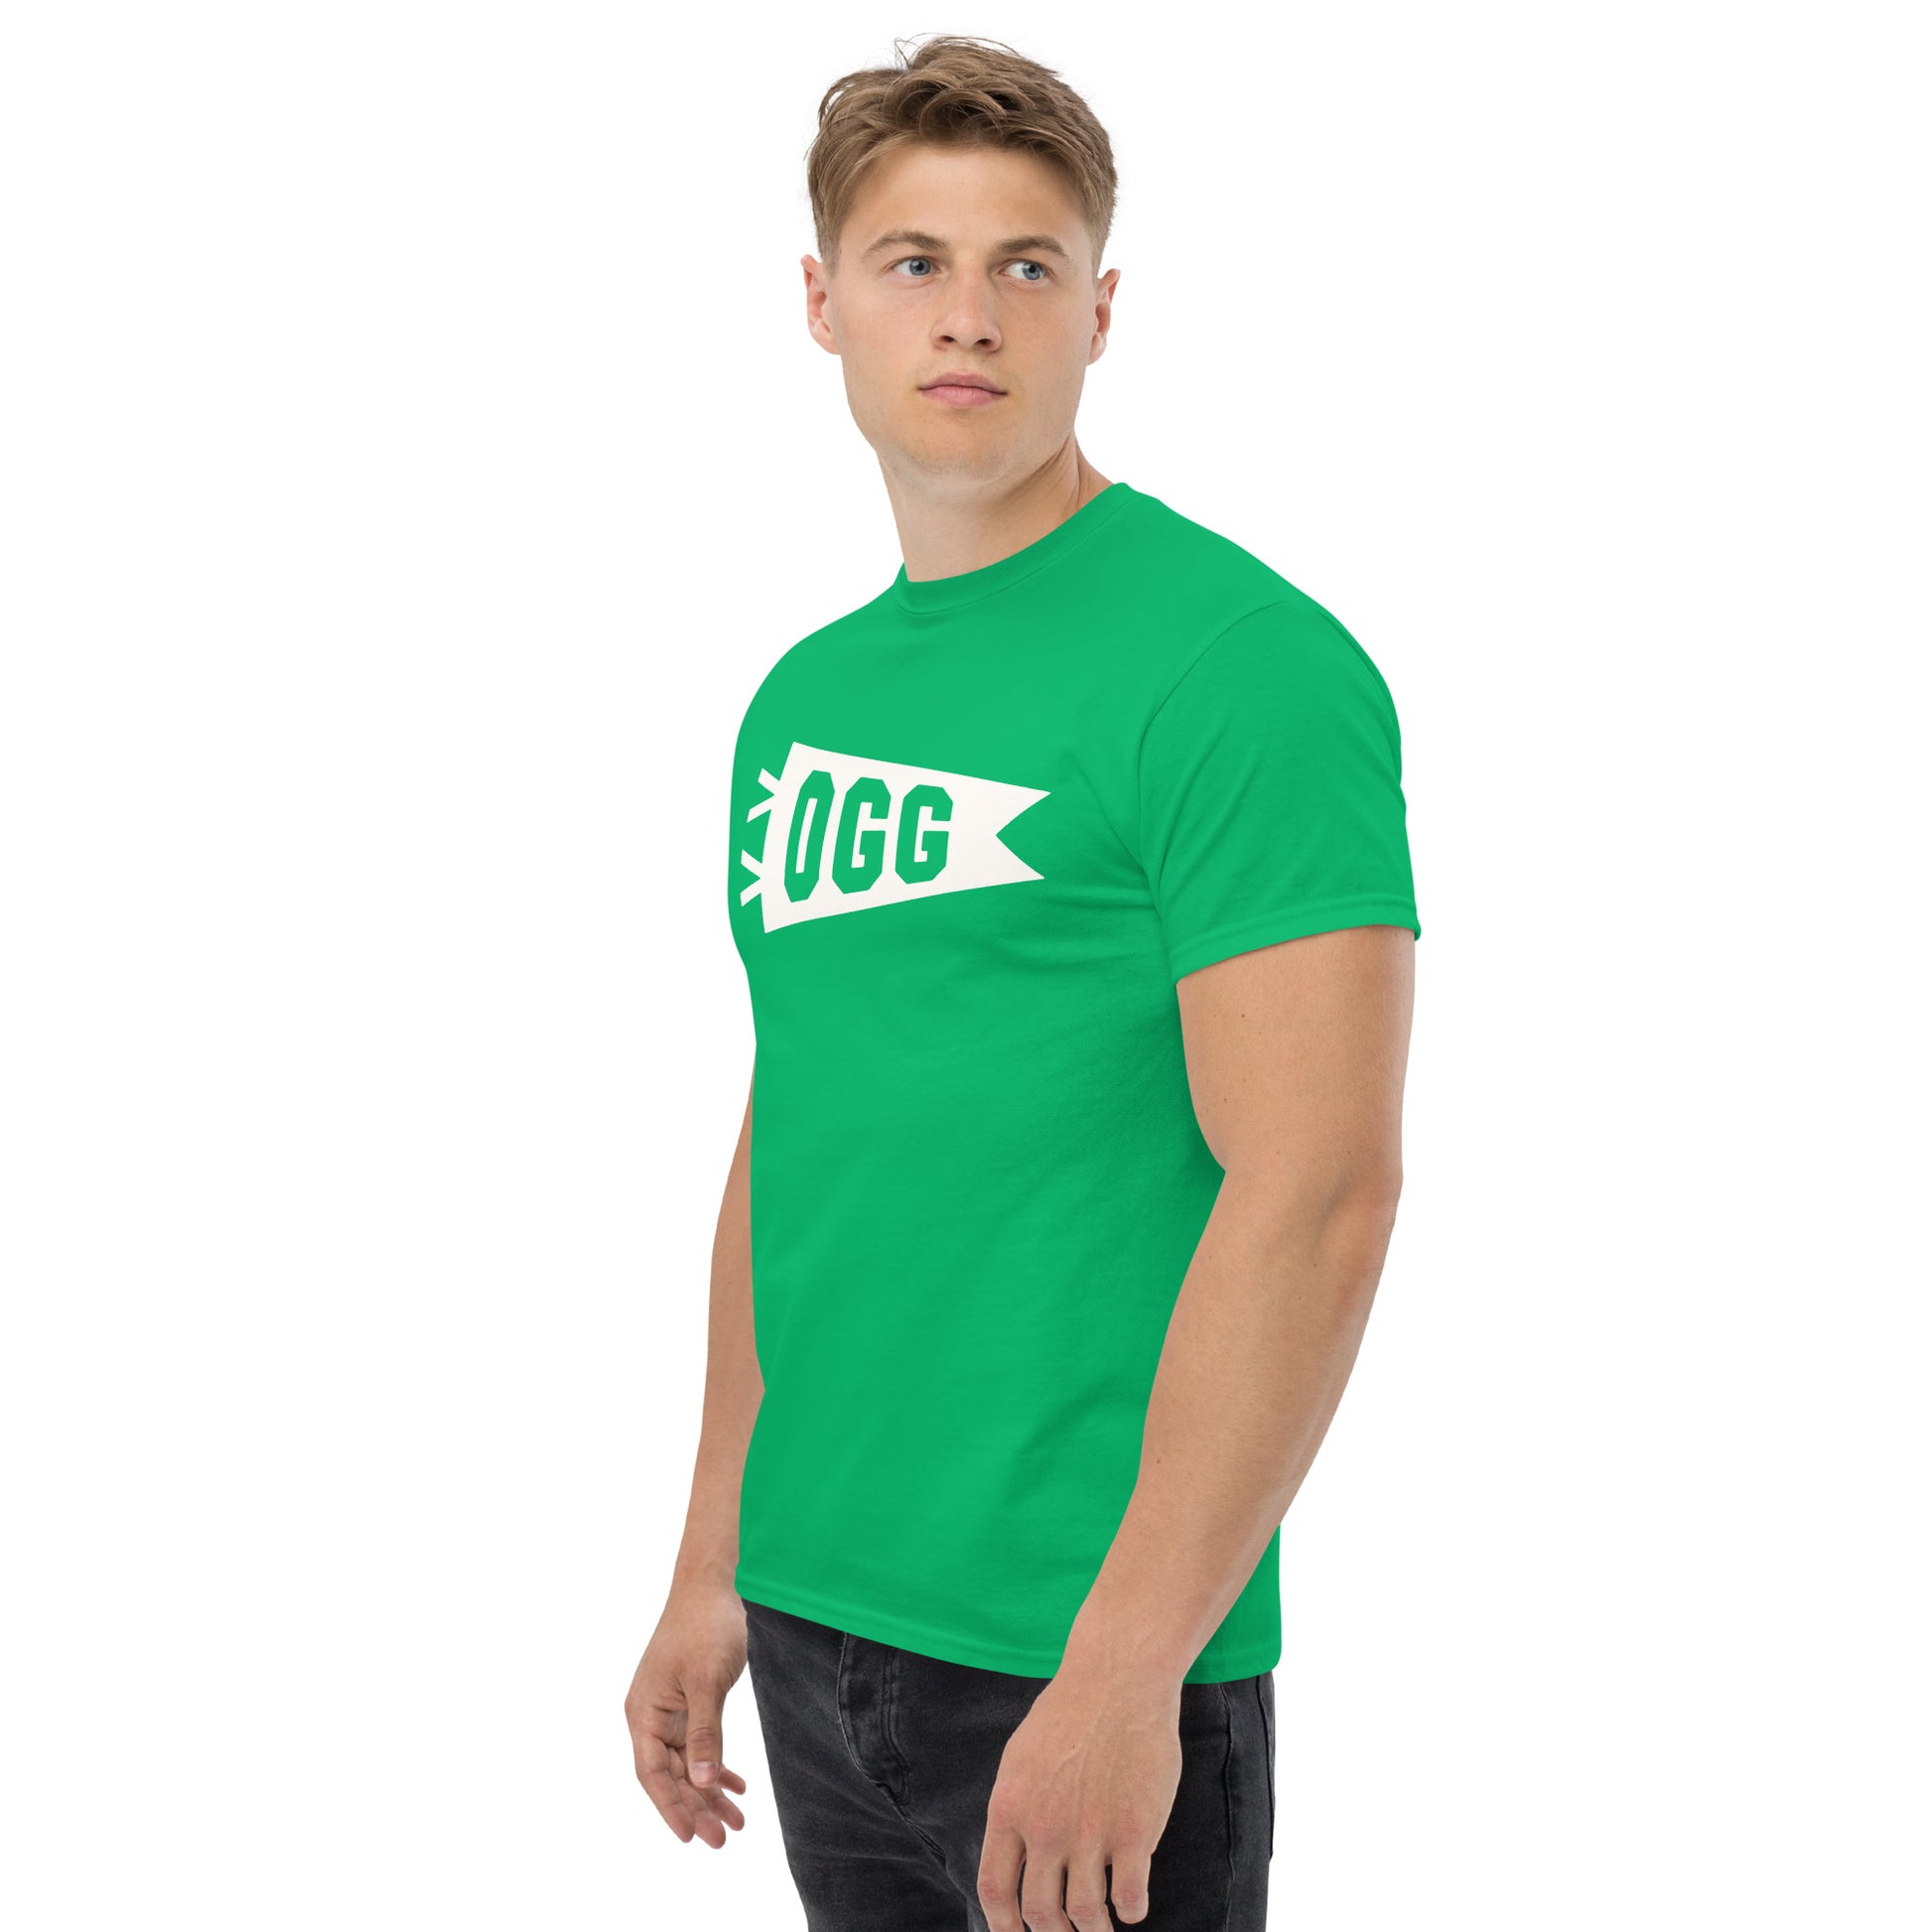 Airport Code Men's T-Shirt - White Graphic • OGG Maui • YHM Designs - Image 05